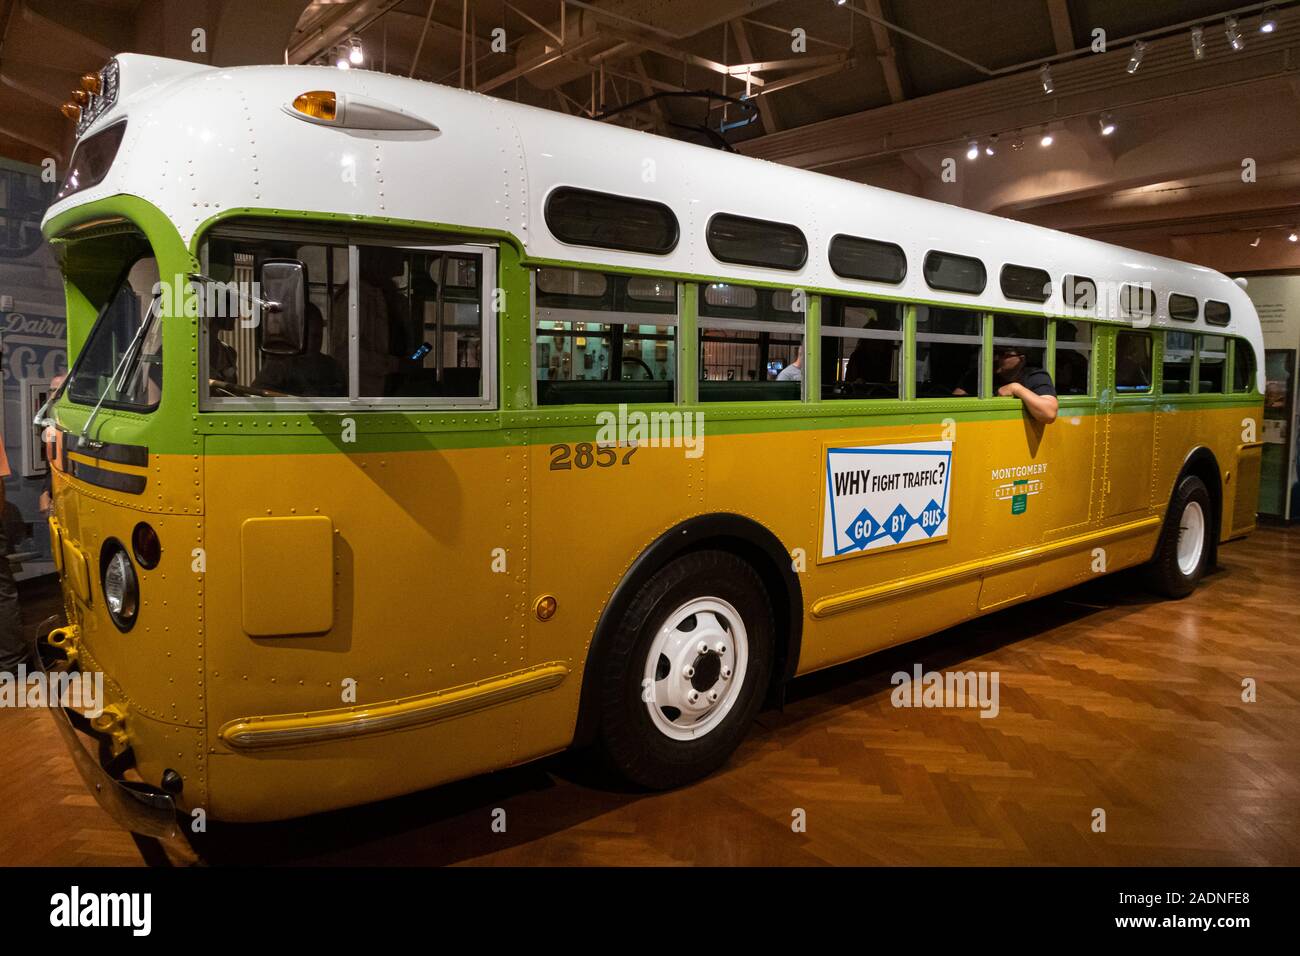 DETROIT,USA - AUGUST 6,2018: Henry Ford Museum. The bus on which Rosa Parks refused to give up her seat sparking the Montgomery Bus Boycott, a U.S. ci Stock Photo